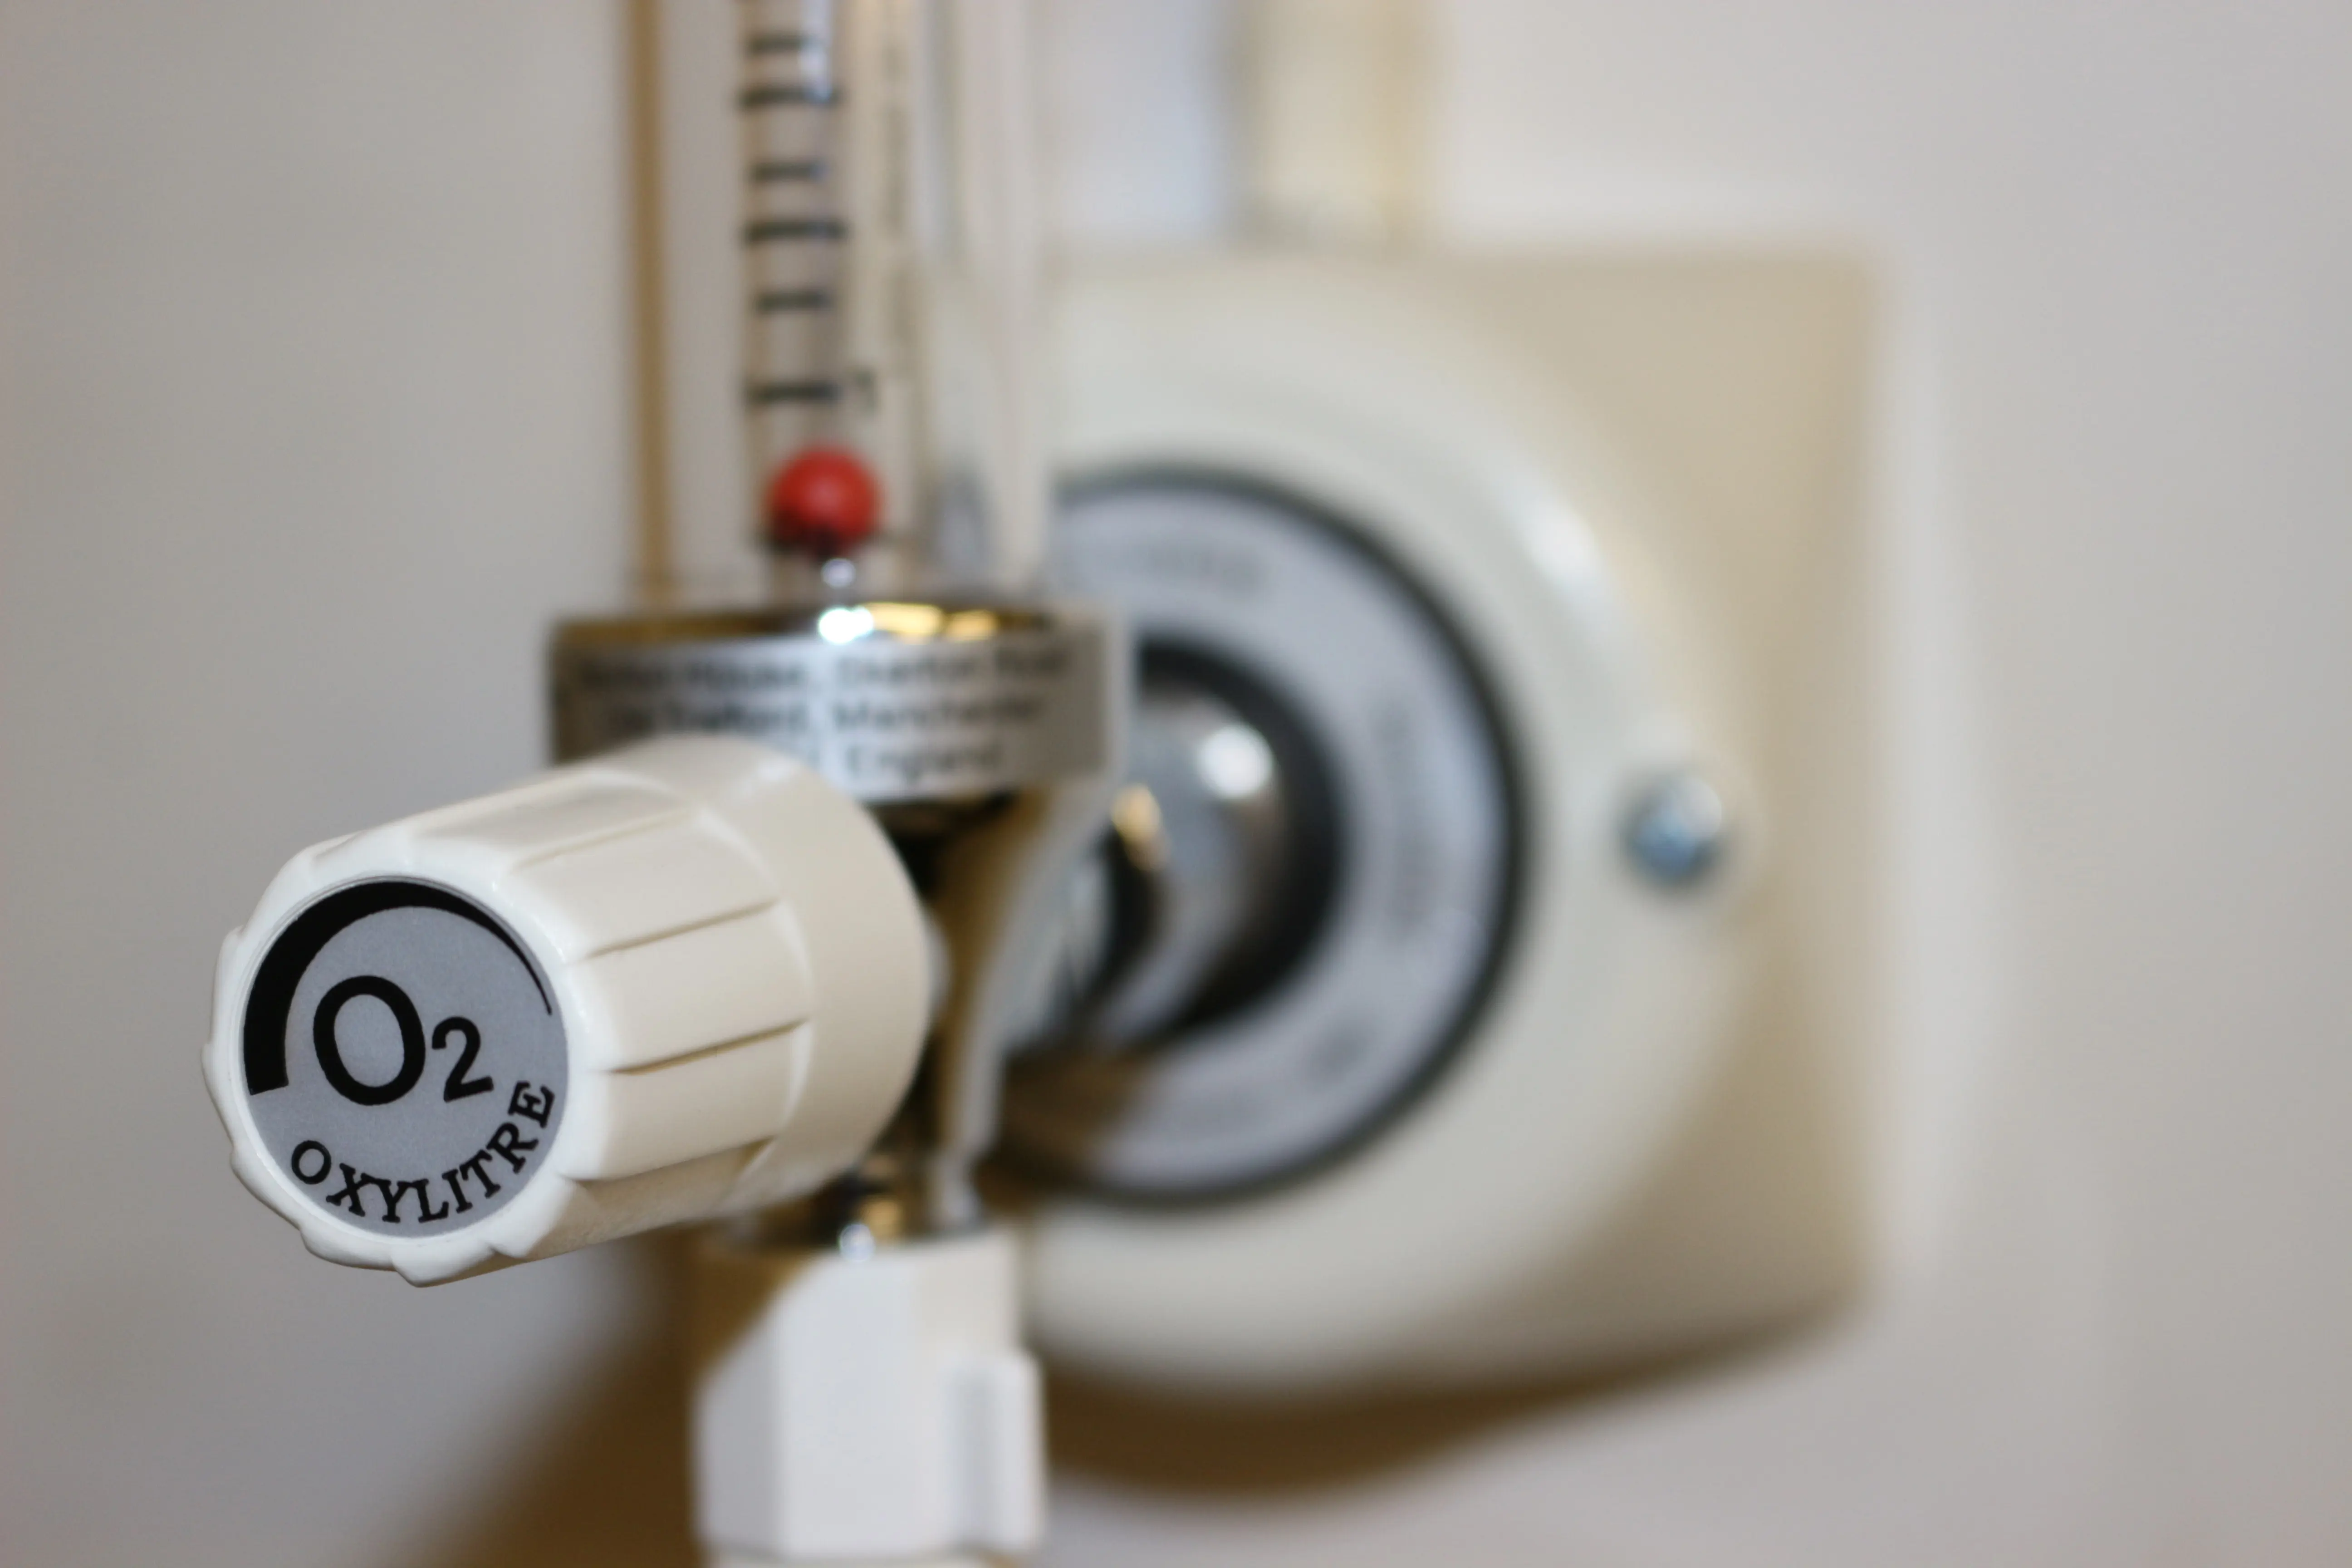 Oxylitre Flowmeter in an oxygen outlet in a Hospital